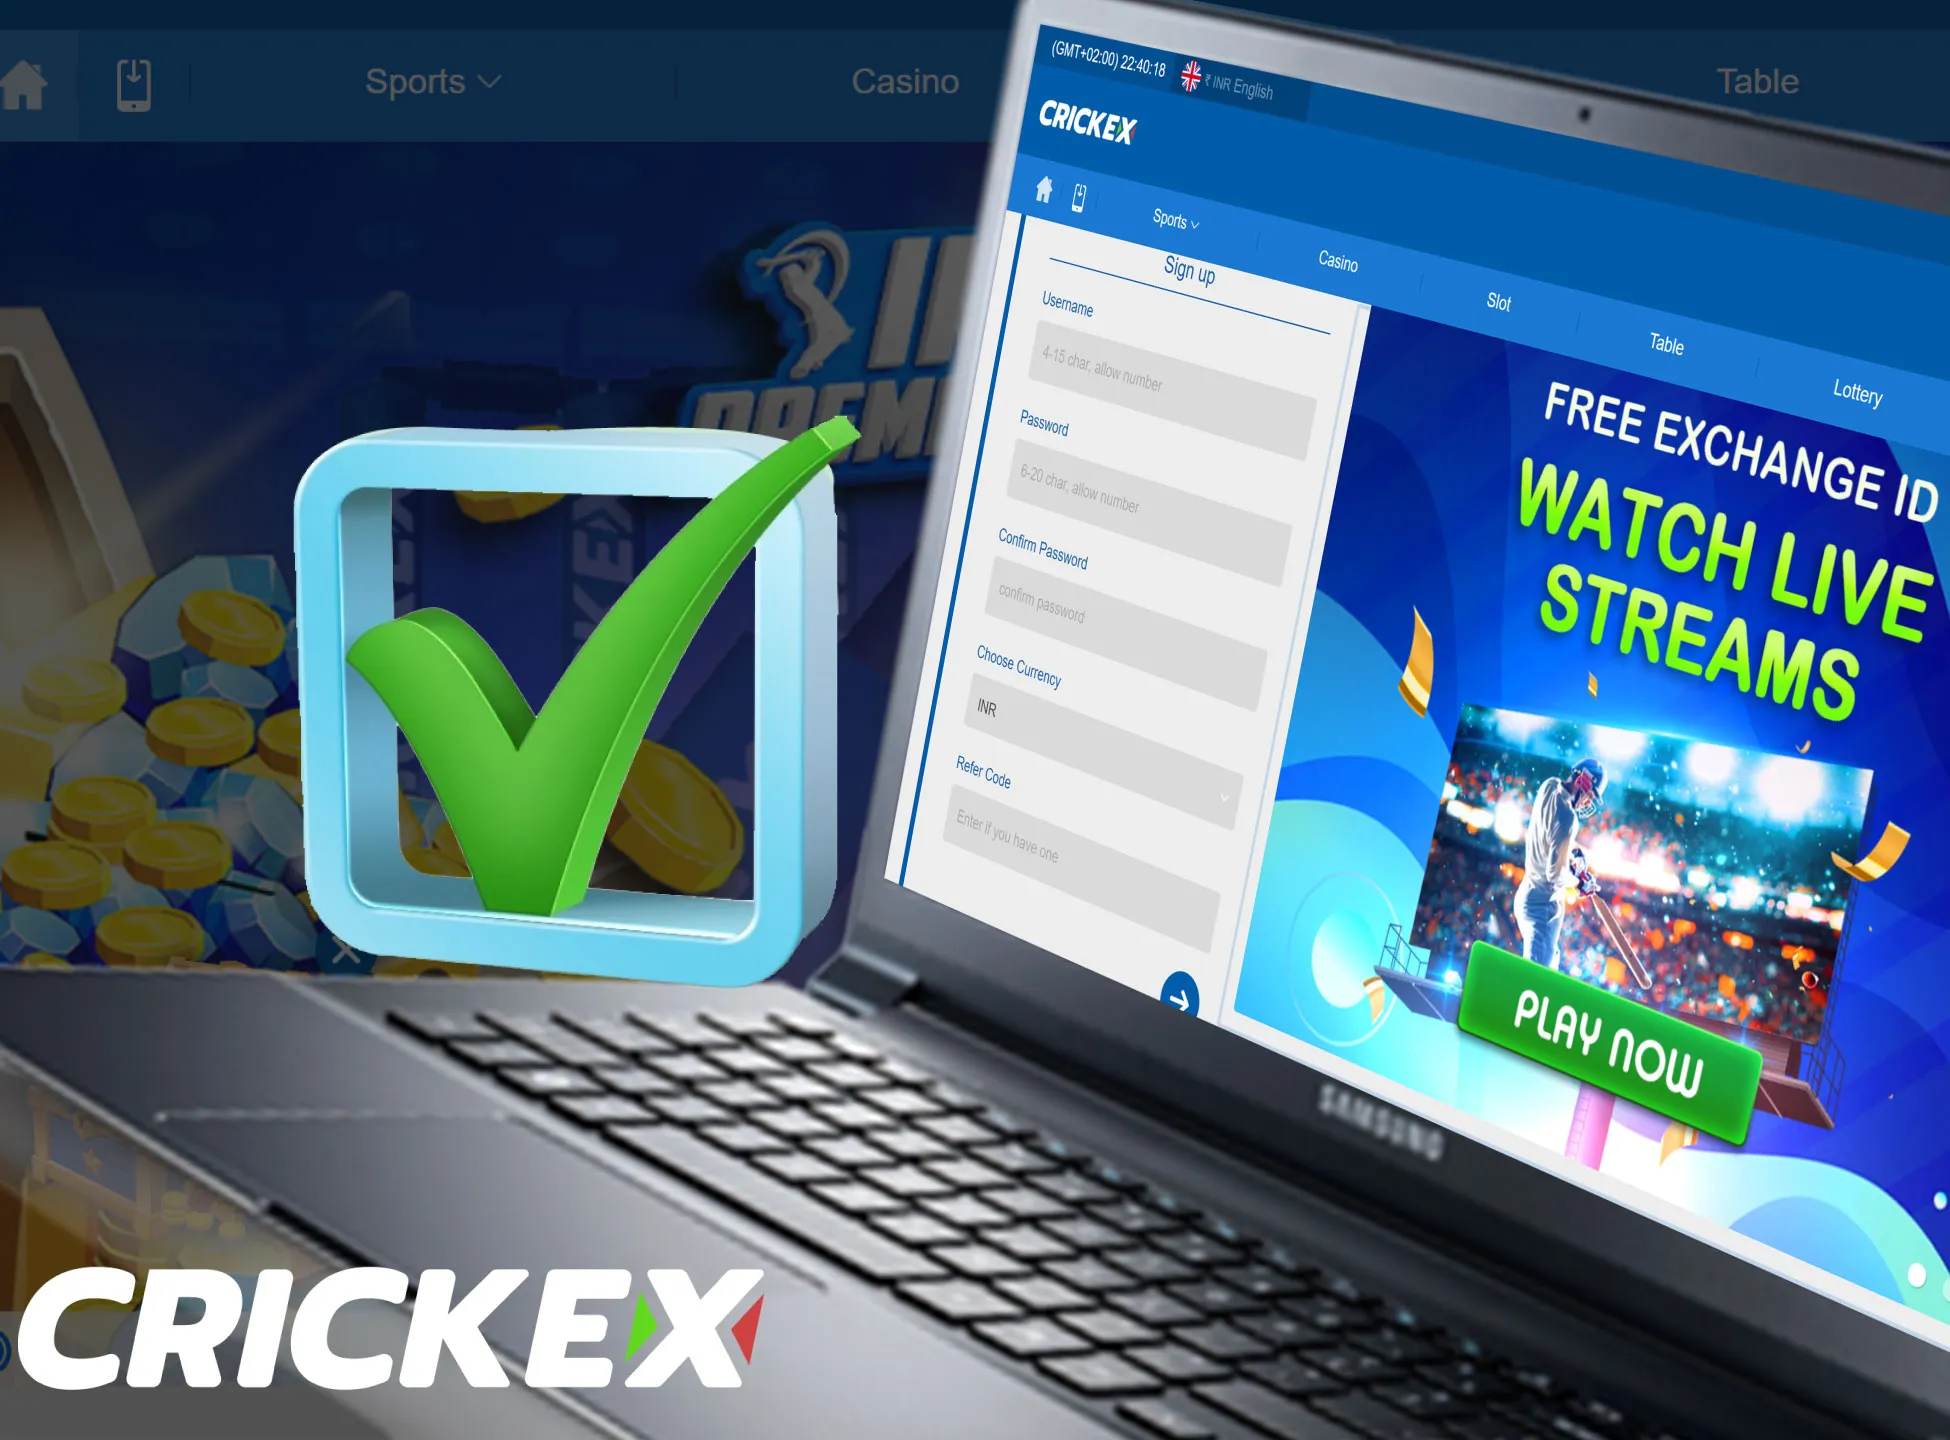 You can sign up for Crickex in 4 simple steps.